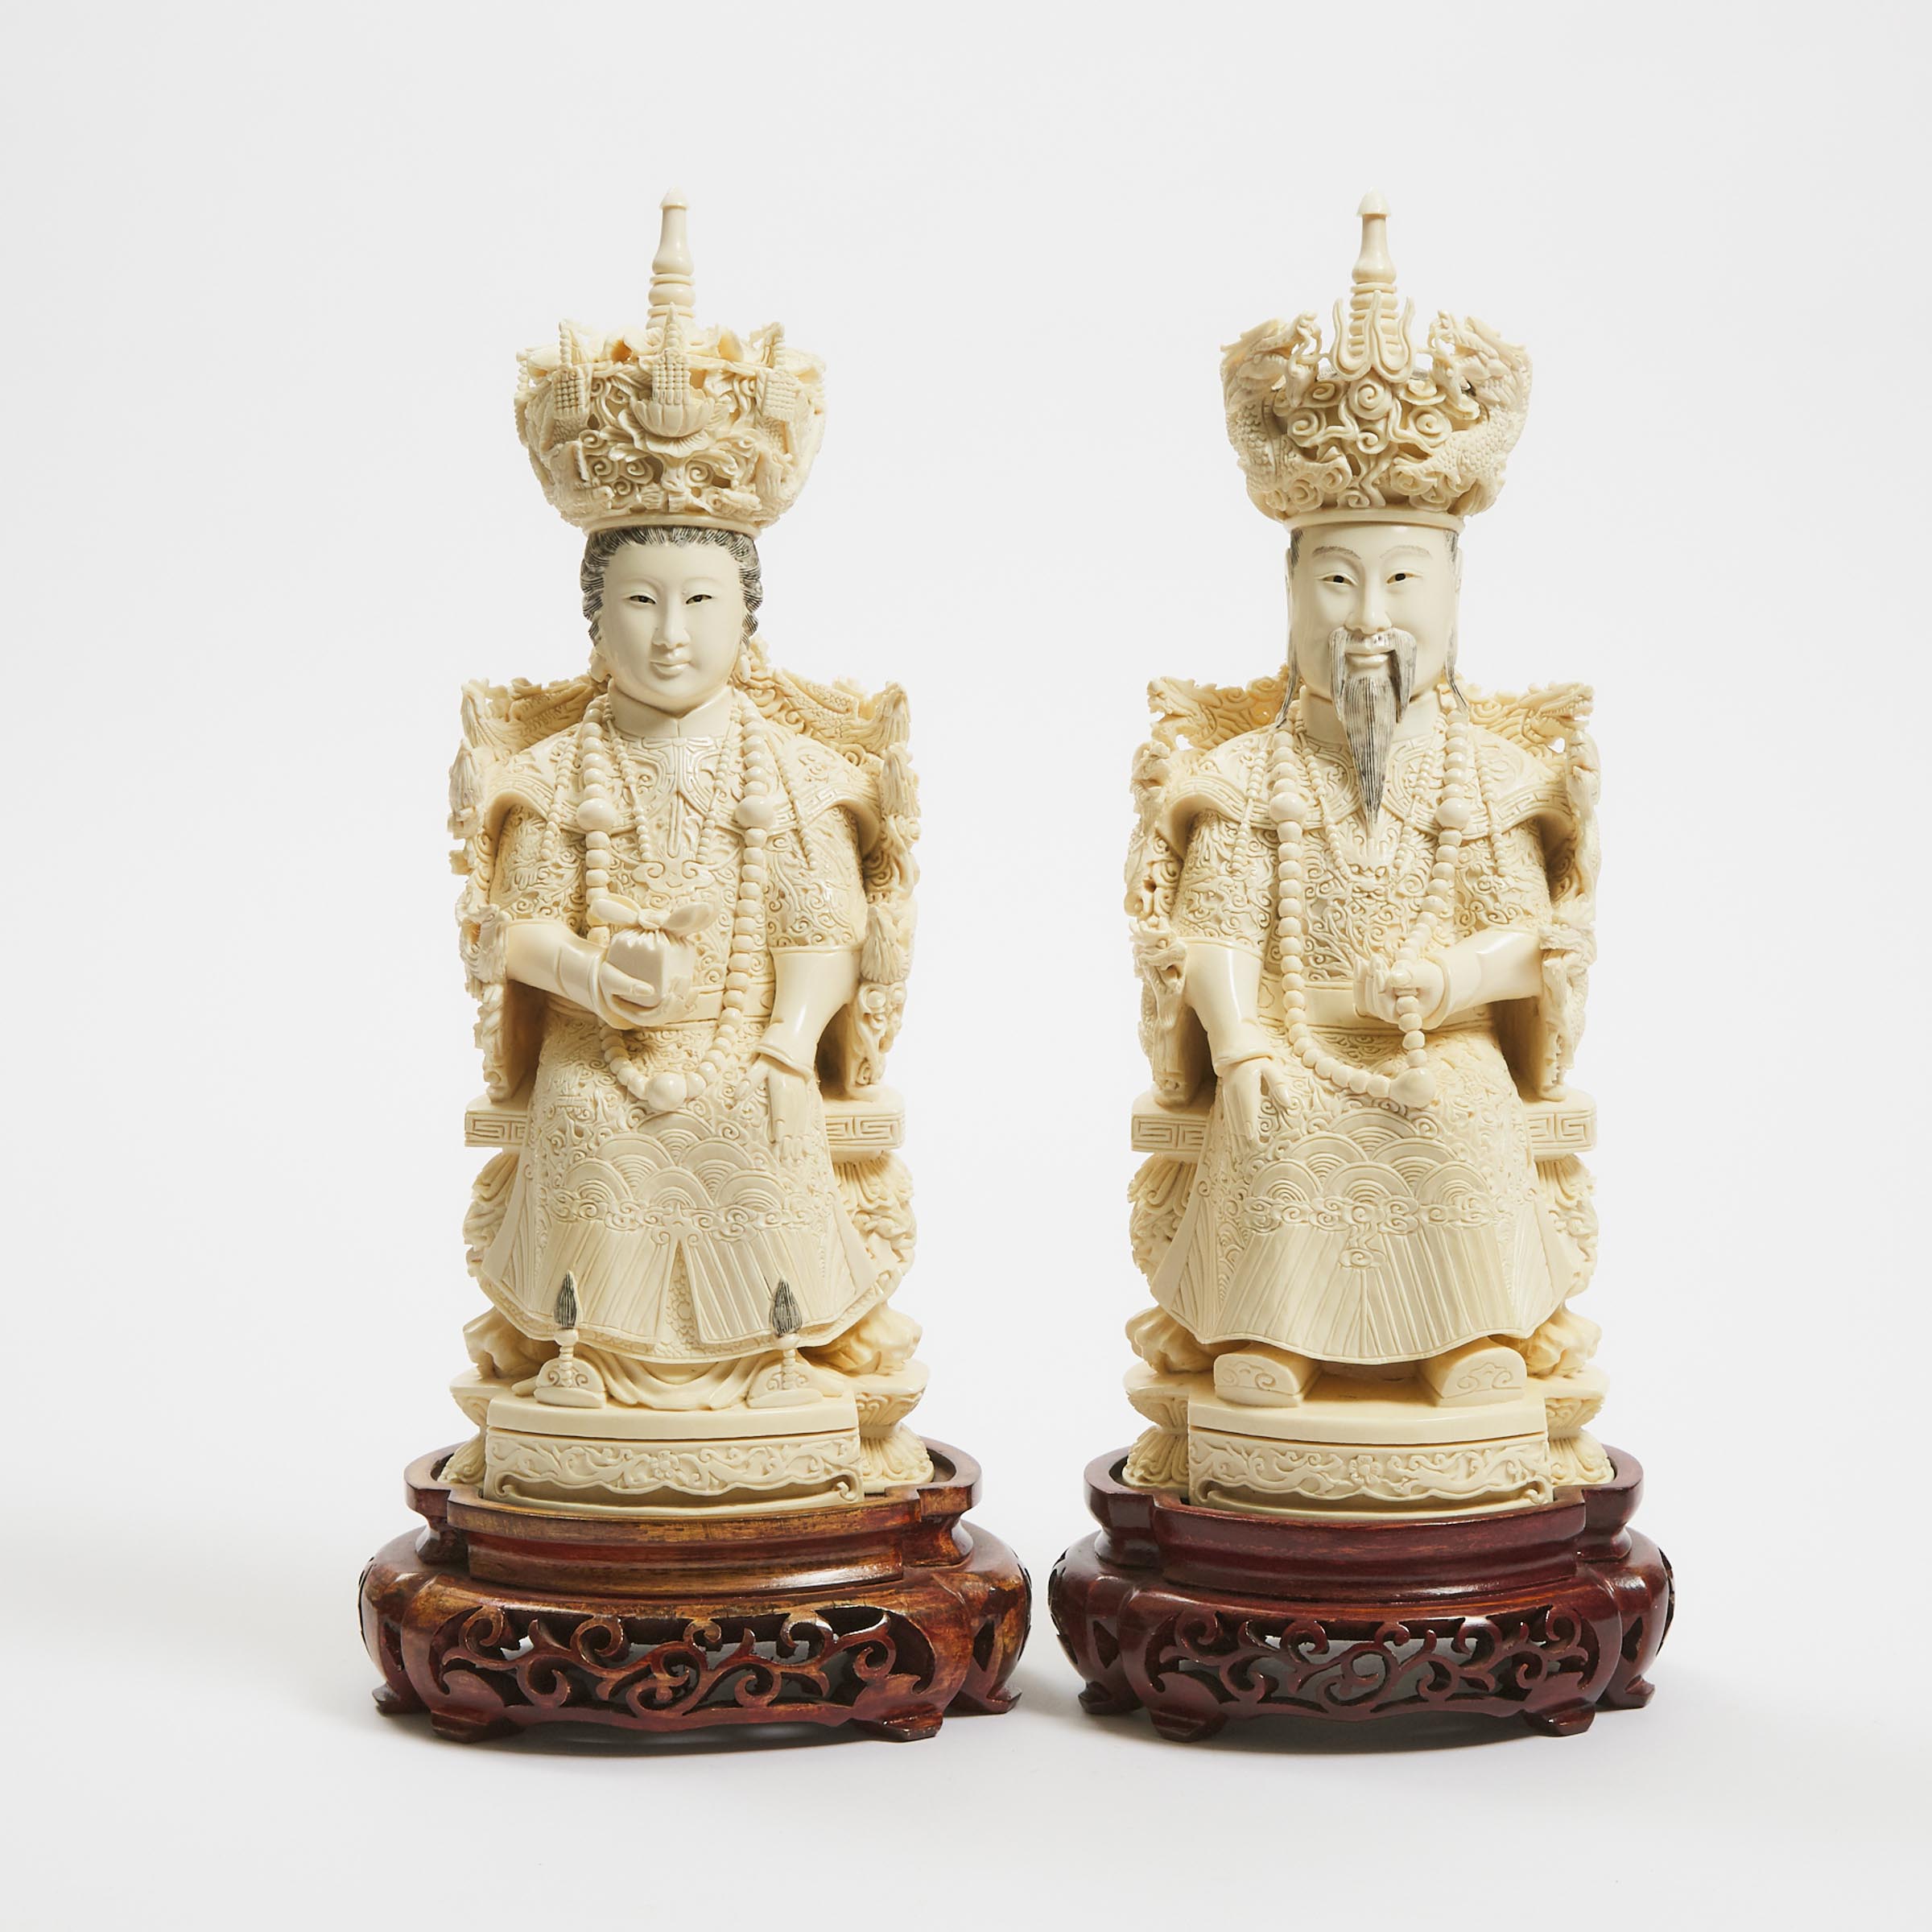 A Large Ivory Carved Emperor and Empress Pair, Mid 20th Century